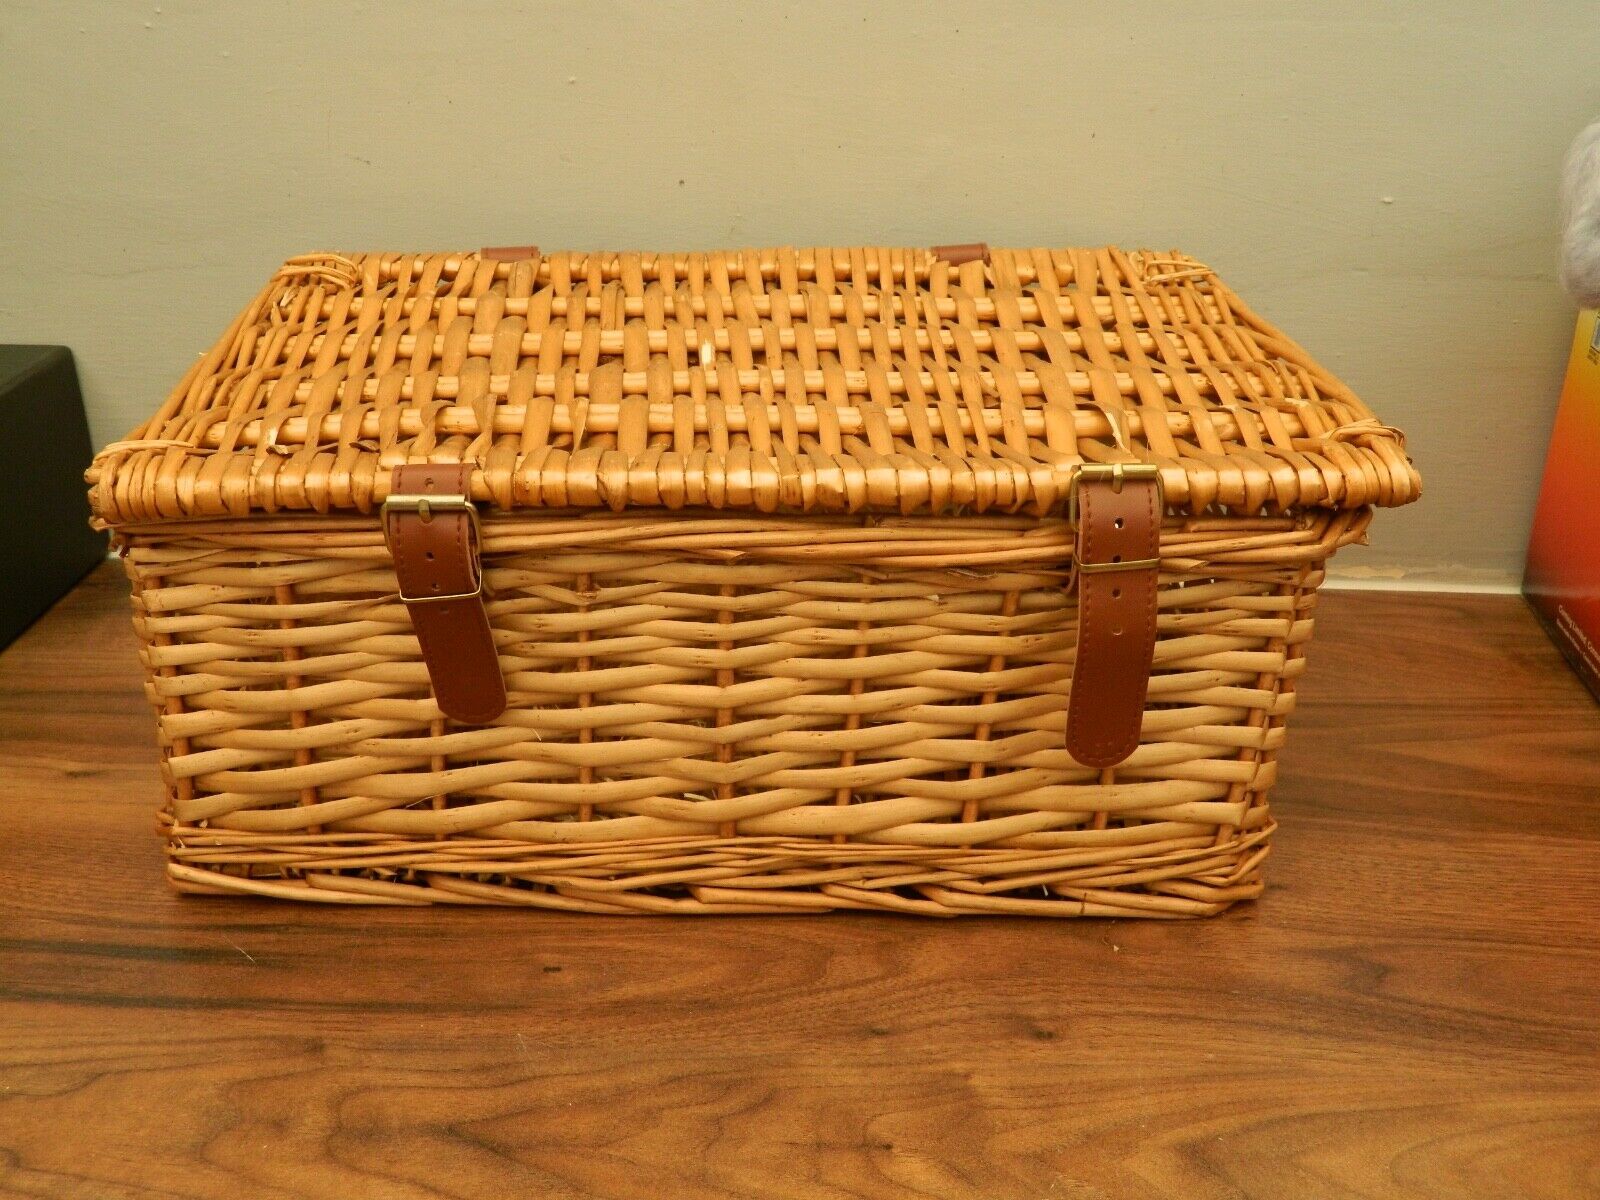 9 Incredible Wicker Baskets for 2023